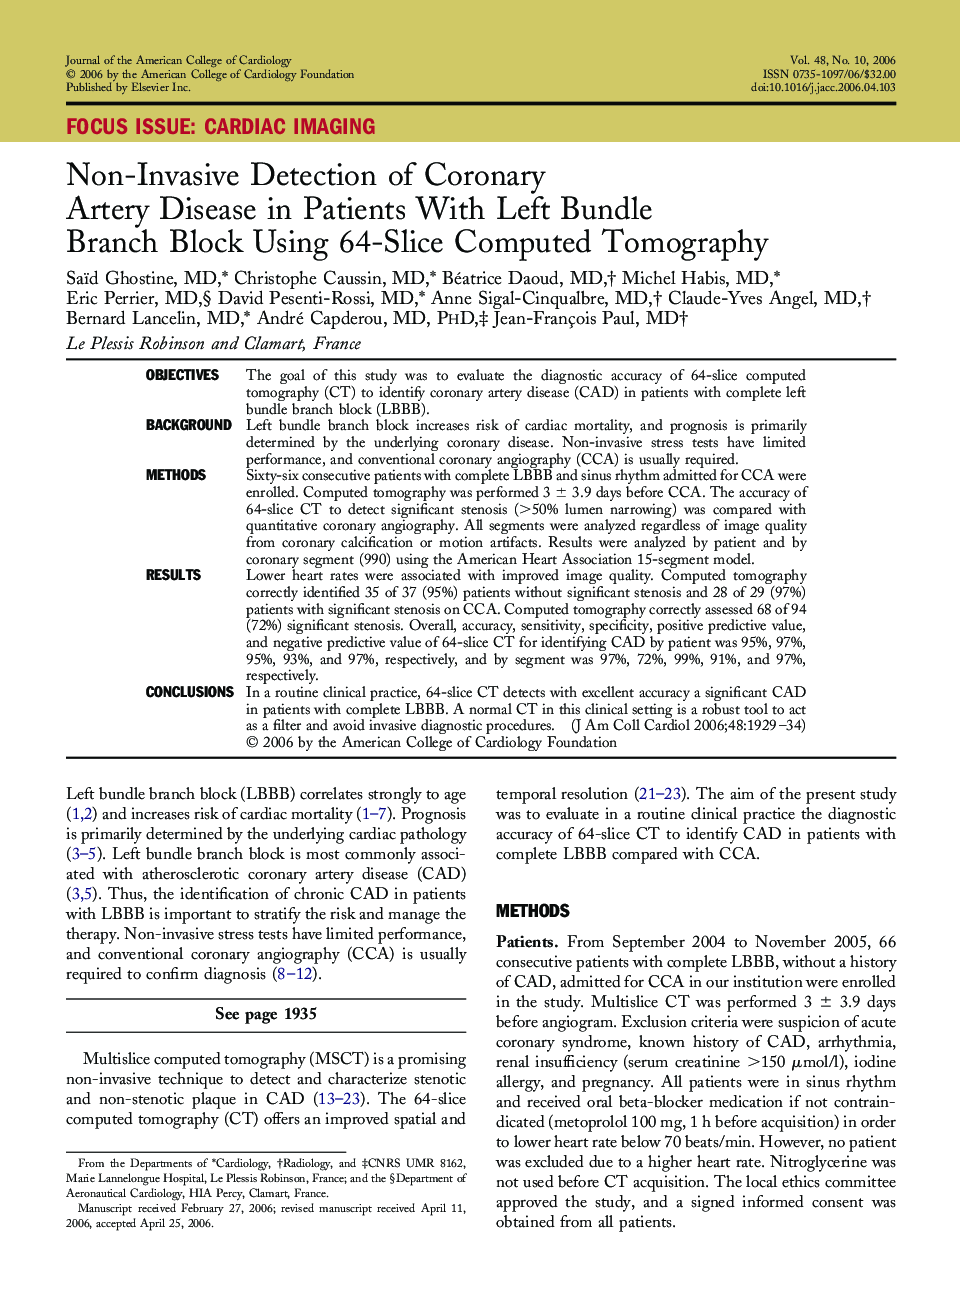 Non-Invasive Detection of Coronary Artery Disease in Patients With Left Bundle Branch Block Using 64-Slice Computed Tomography